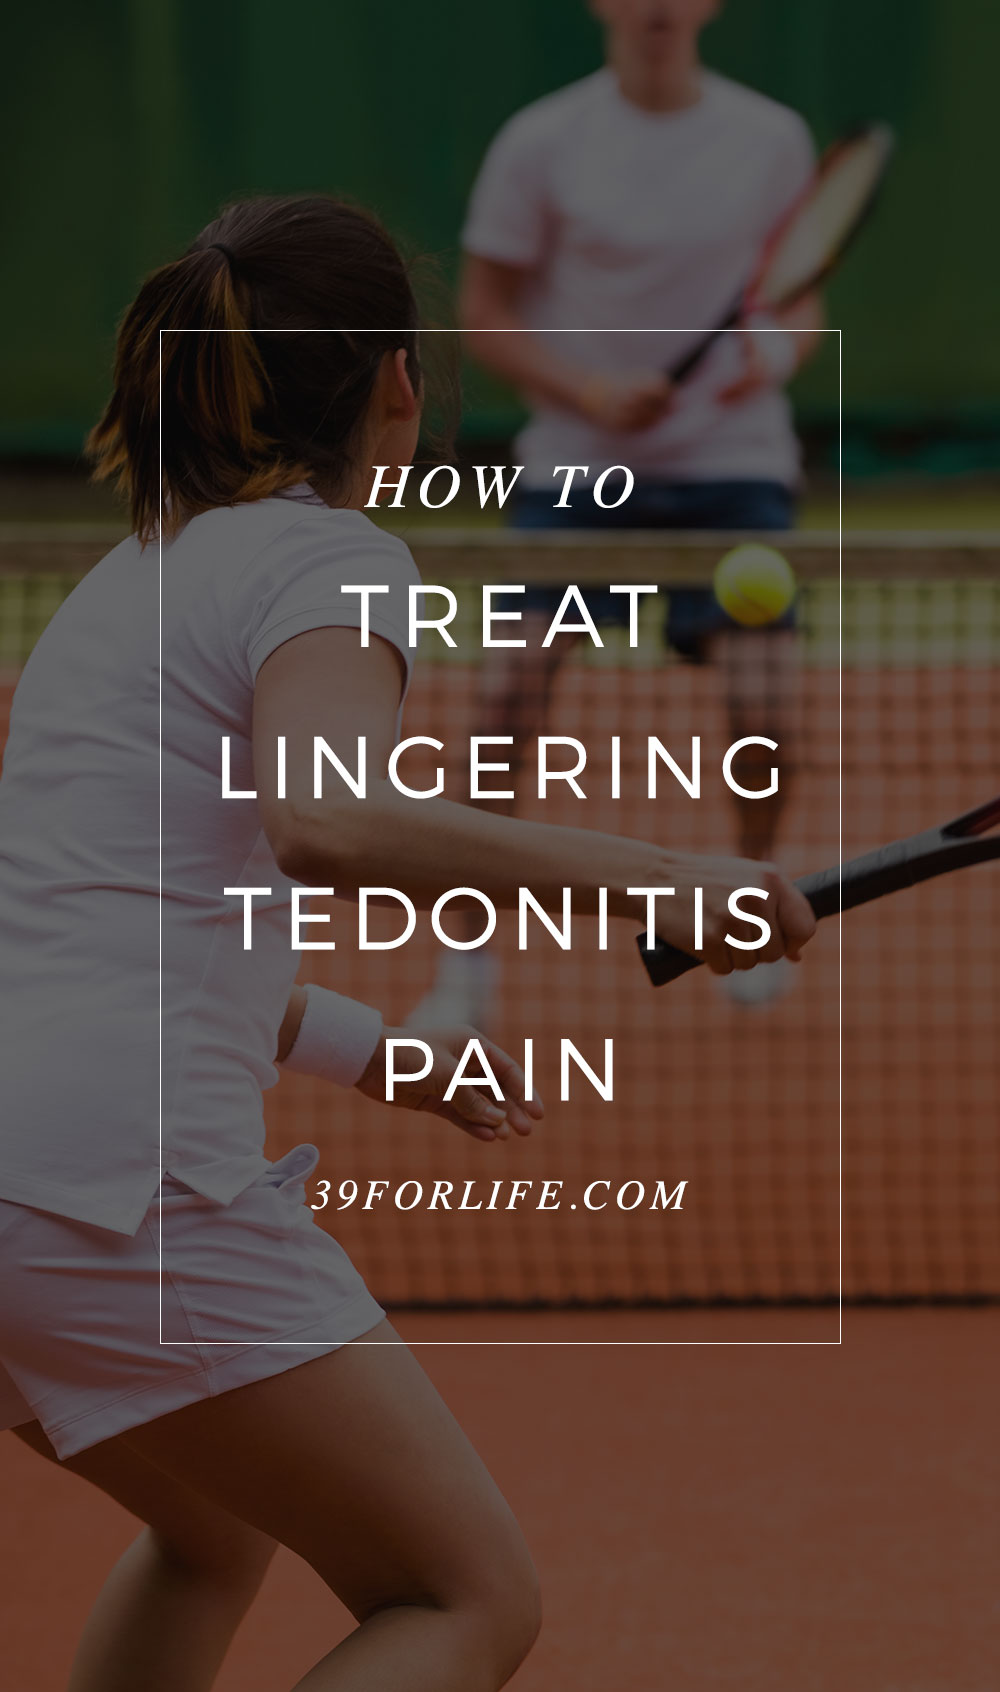 Tendonitis is also known as tennis elbow, pitcher's shoulder, golfer's elbow, and jumper's knee. Here's how to treat the lingering pain.